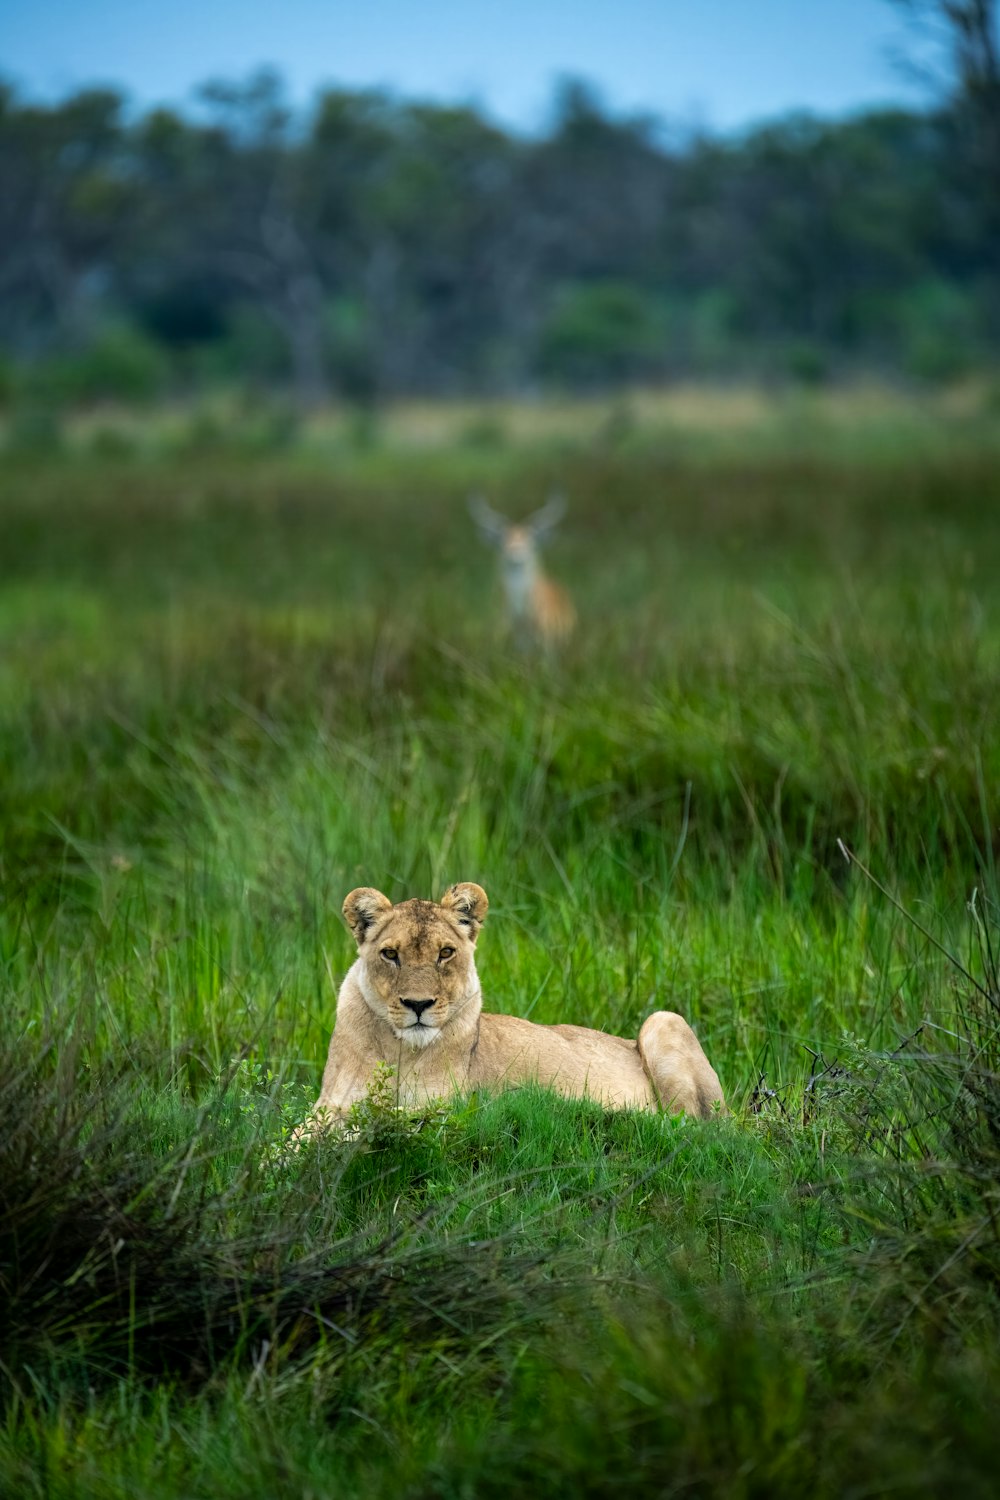 a lion laying in the grass with a deer in the background